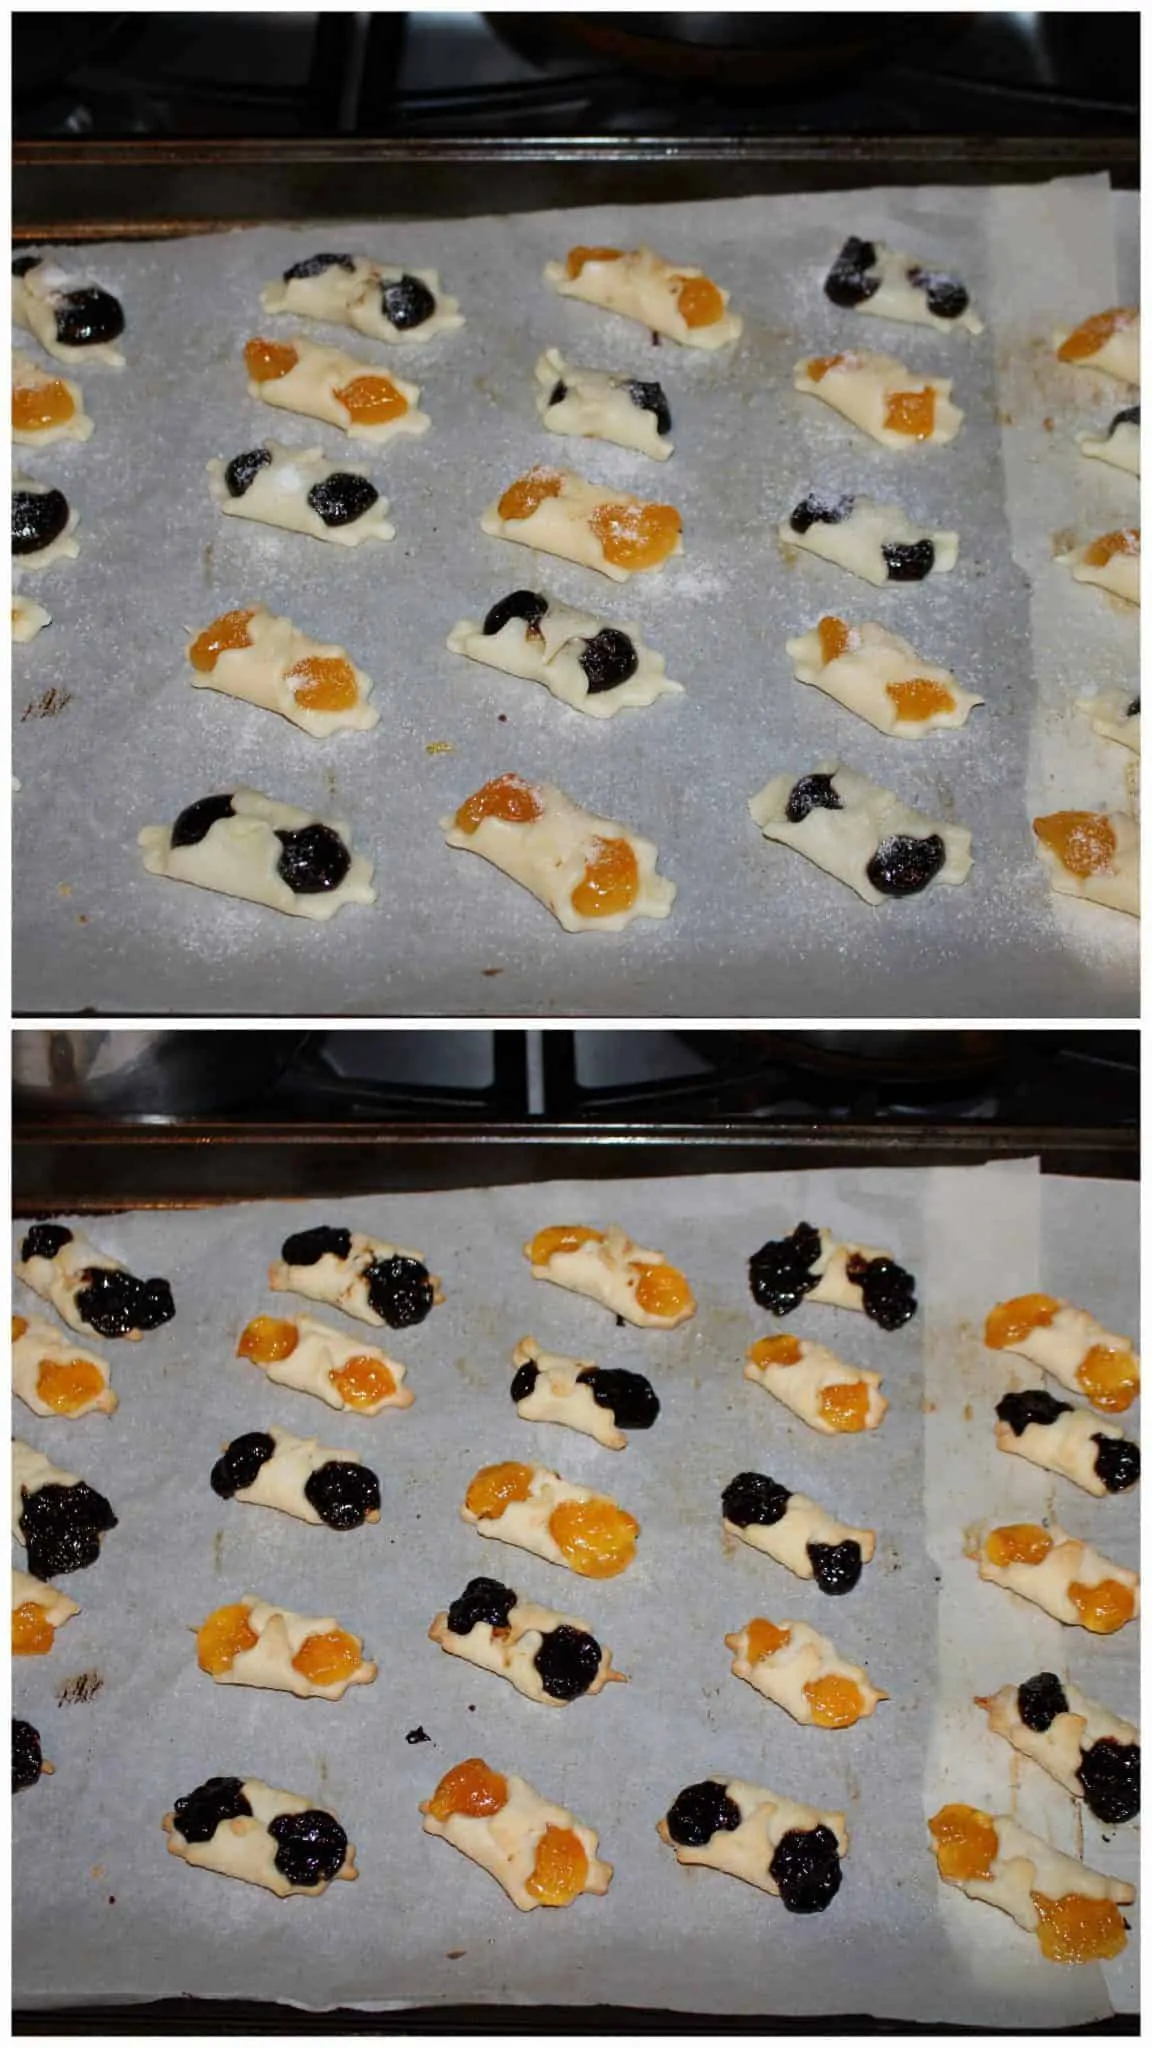 Baking the pastry in oven